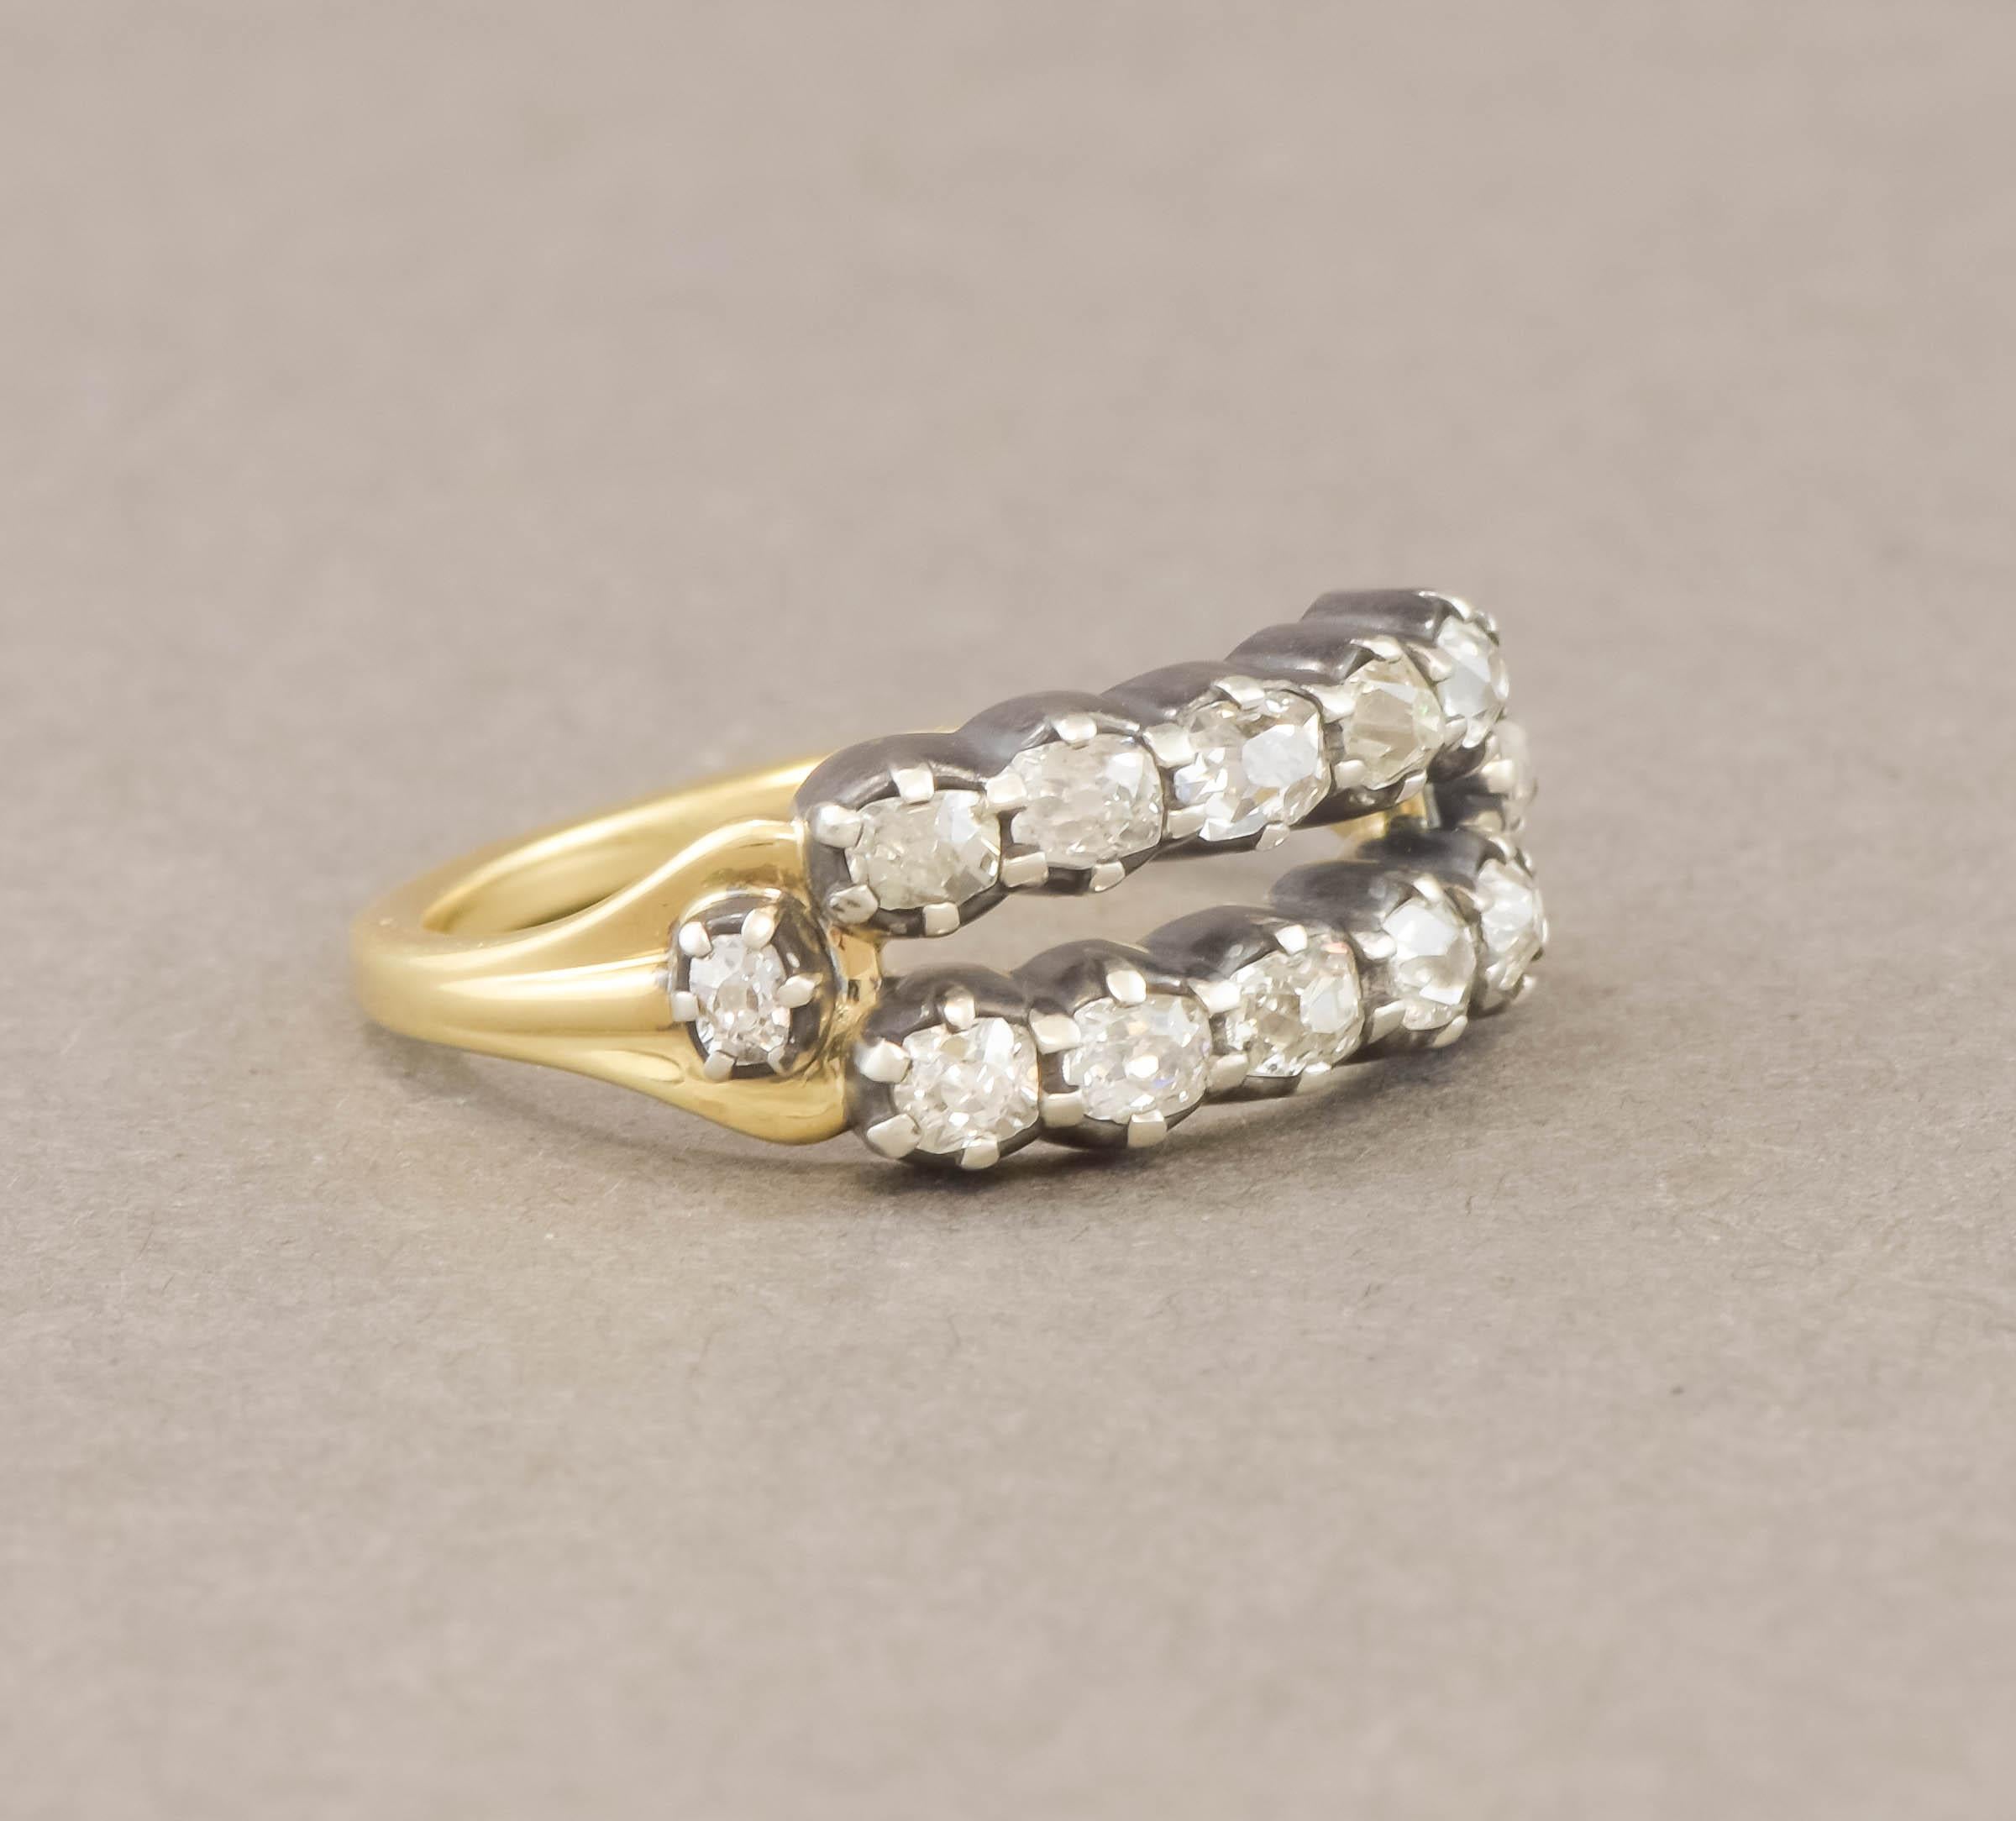 Double Row Ring with Antique Diamonds - Wedding, Anniversary or Stacking Band For Sale 7